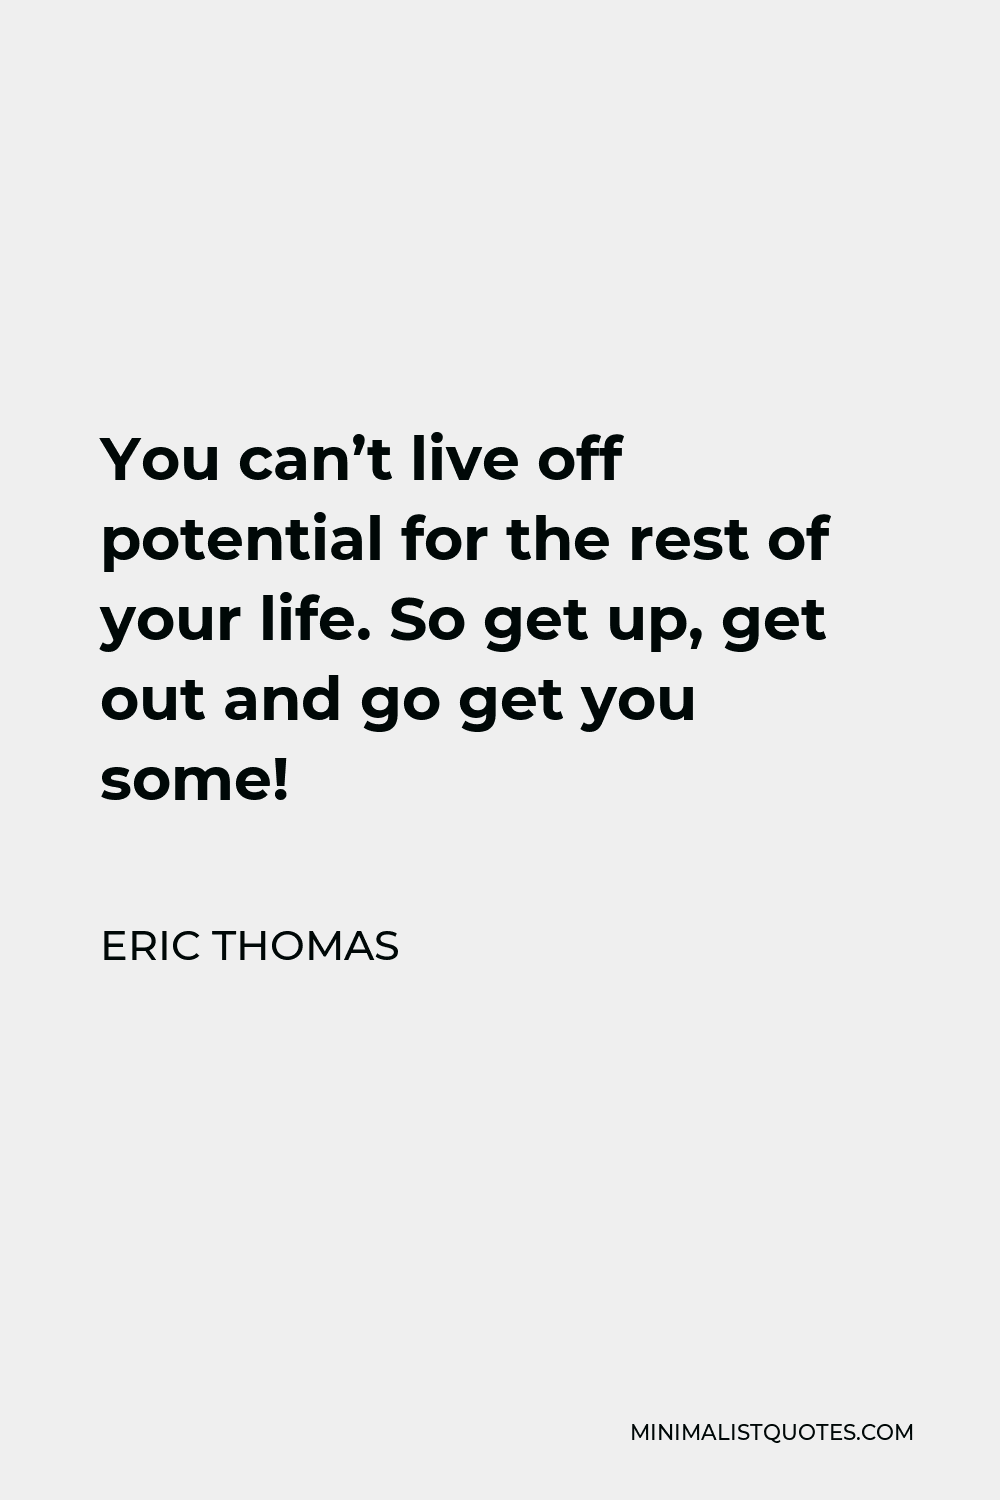 Eric Thomas Quote - You can’t live off potential for the rest of your life. So get up, get out and go get you some!